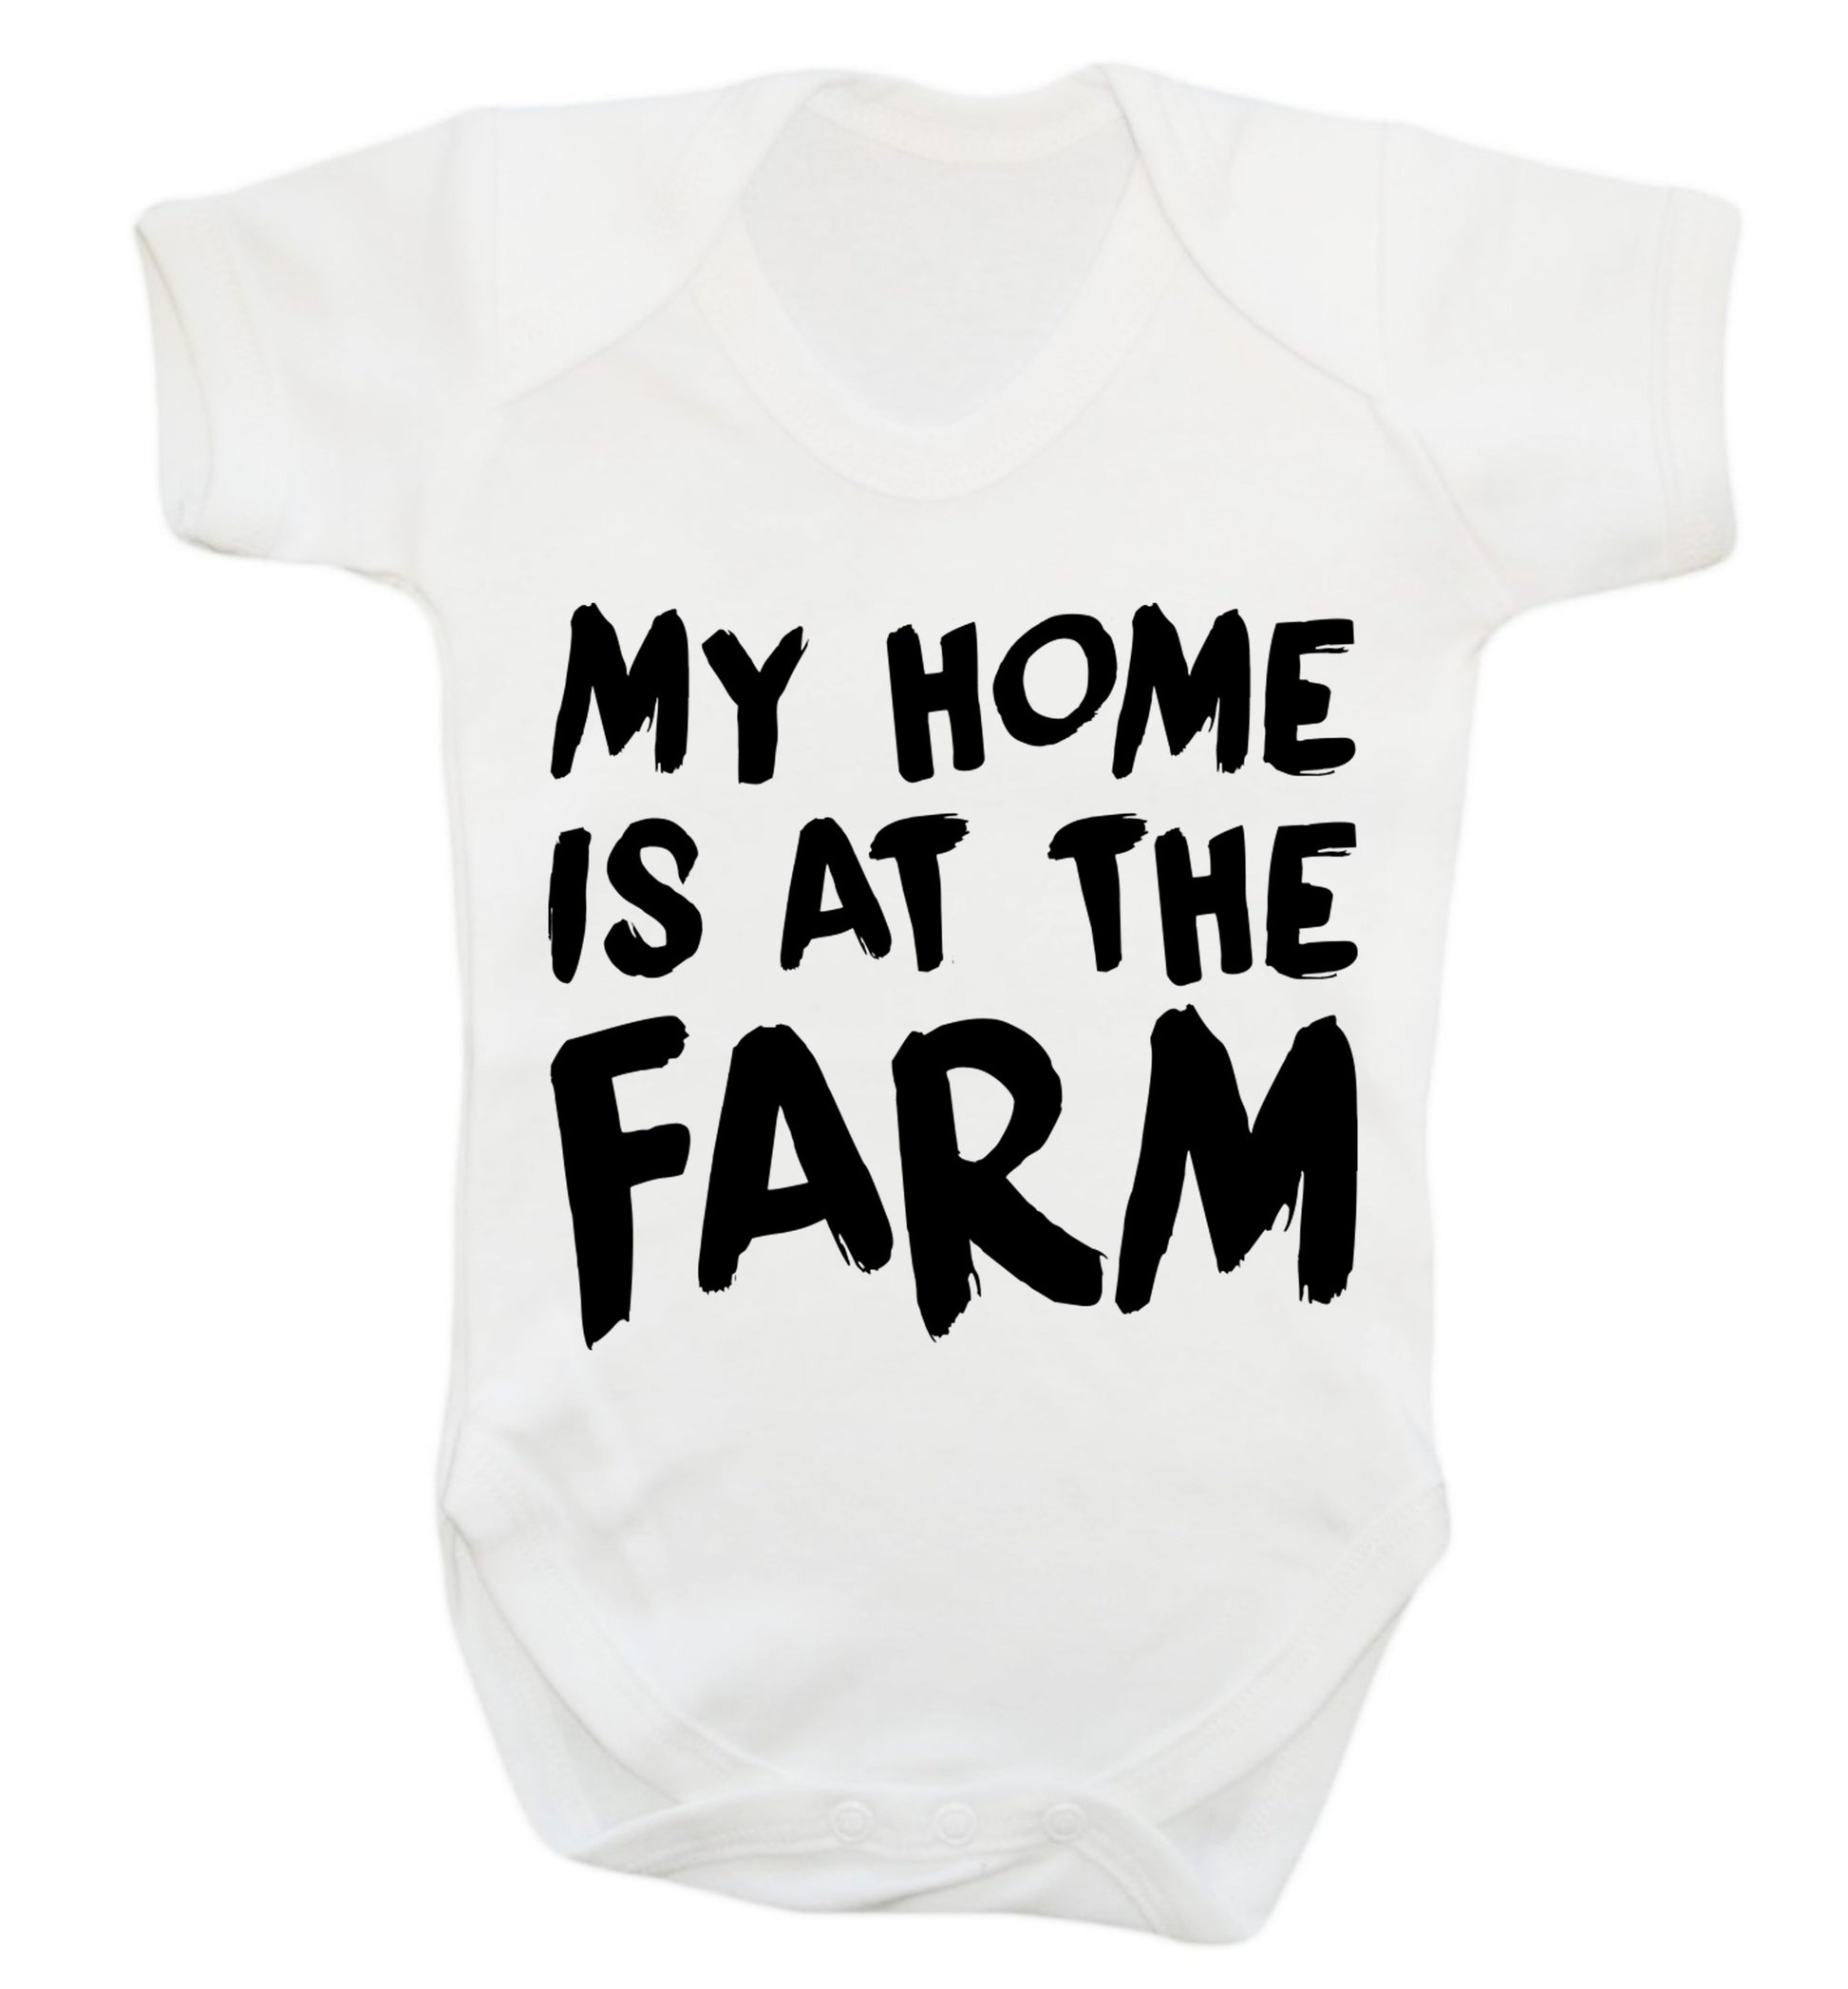 My home is at the farm Baby Vest white 18-24 months